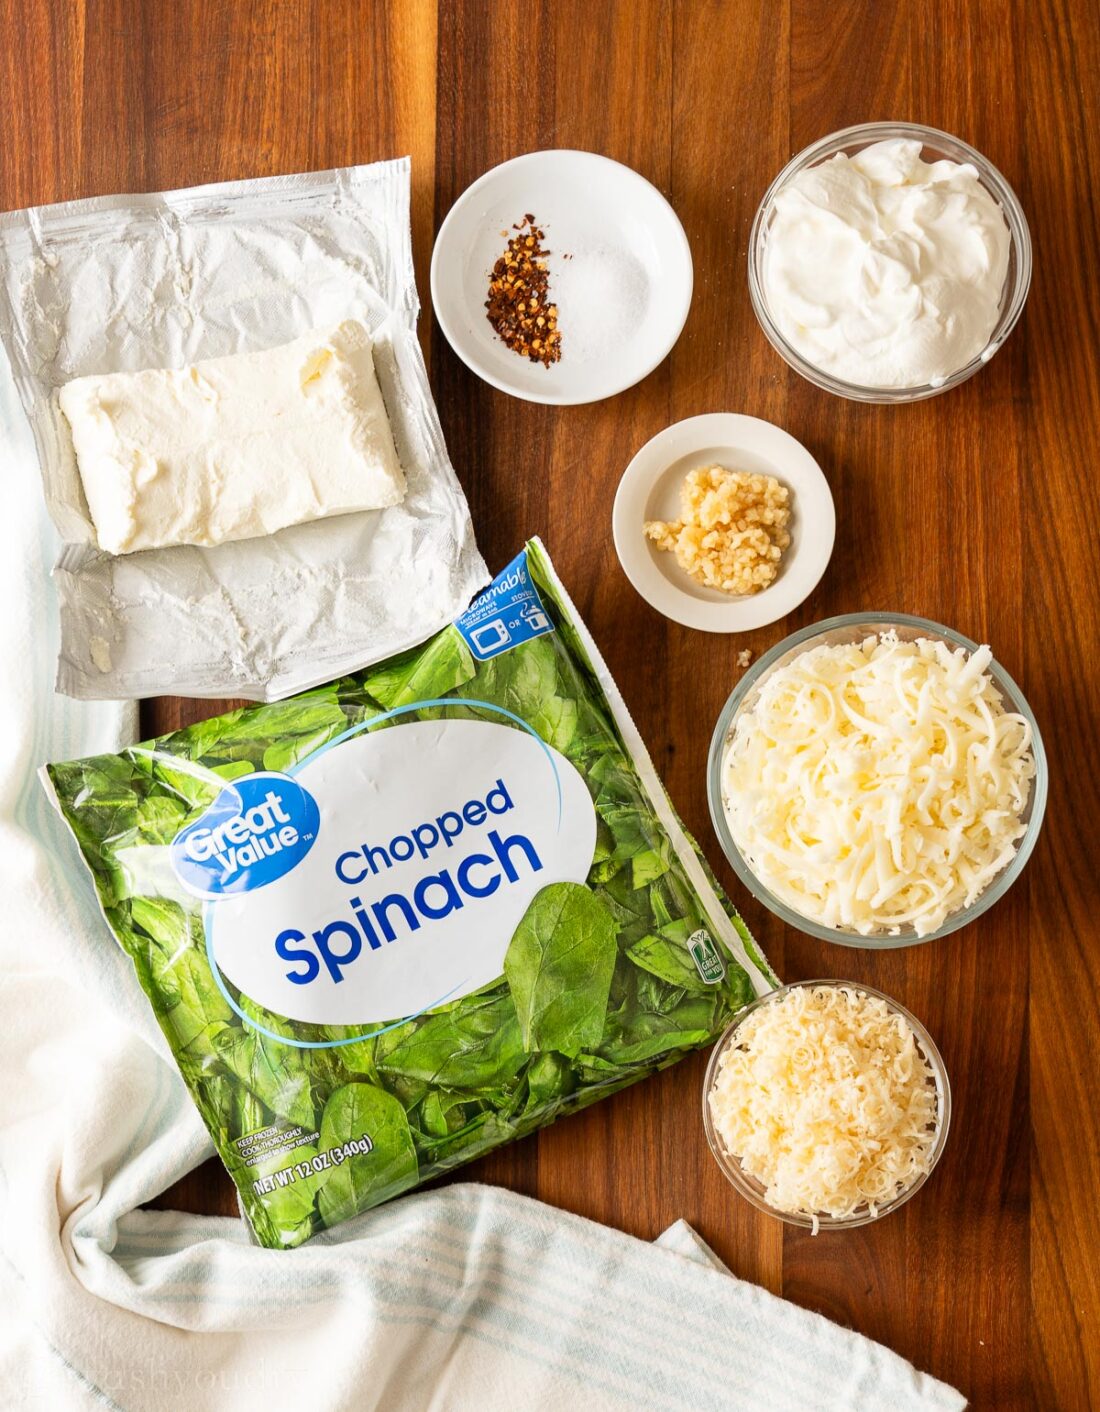 Ingredients for spinach dip on wooden surface with parmesan cheese.